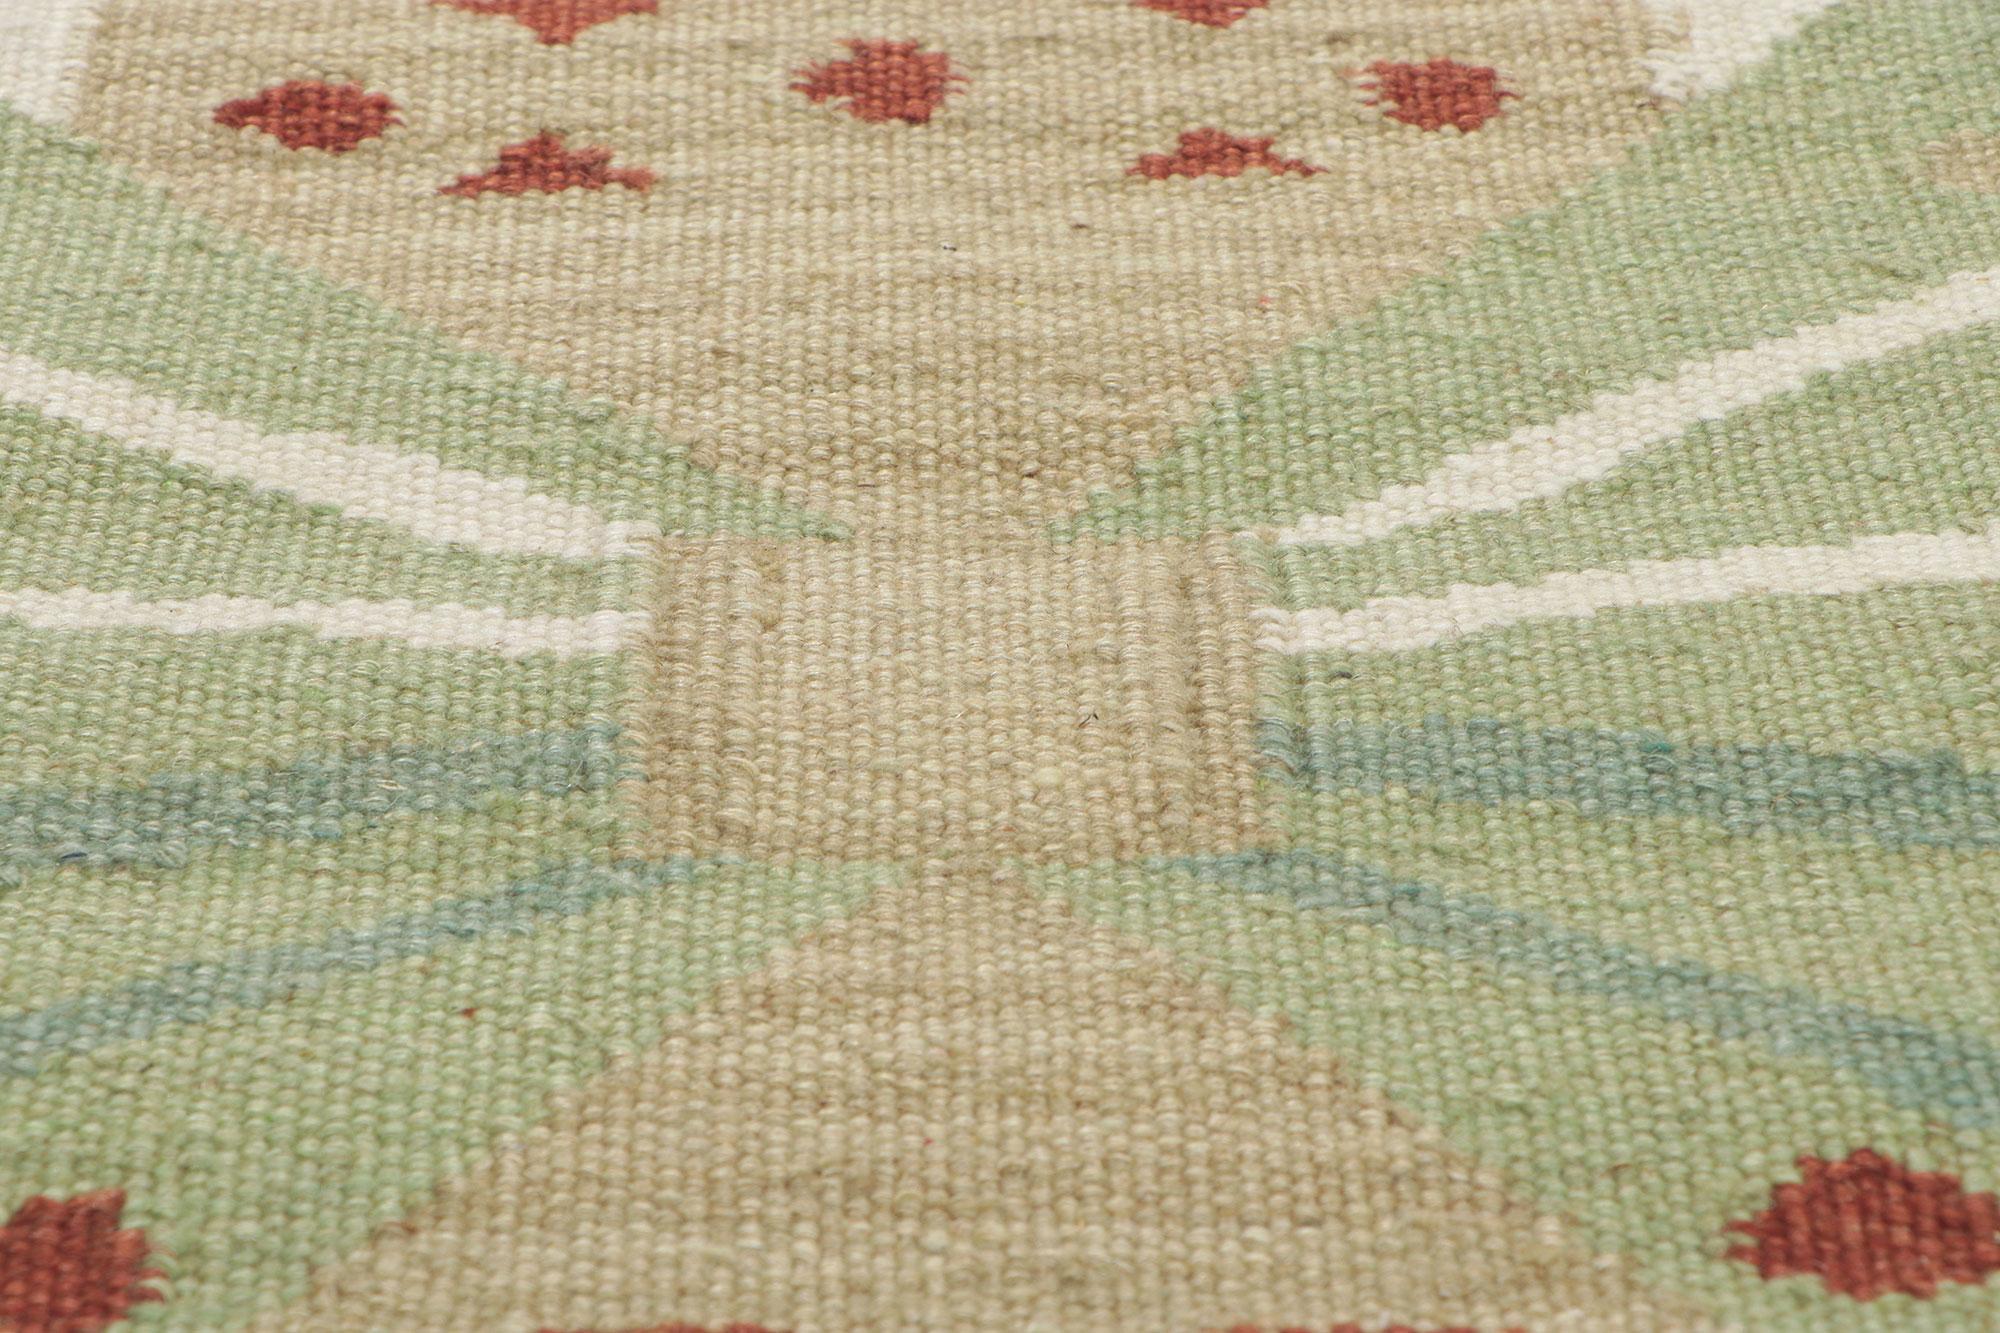 Swedish Inspired Kilim Rug, Scandinavian Modern Meets Biophilic Design In New Condition For Sale In Dallas, TX